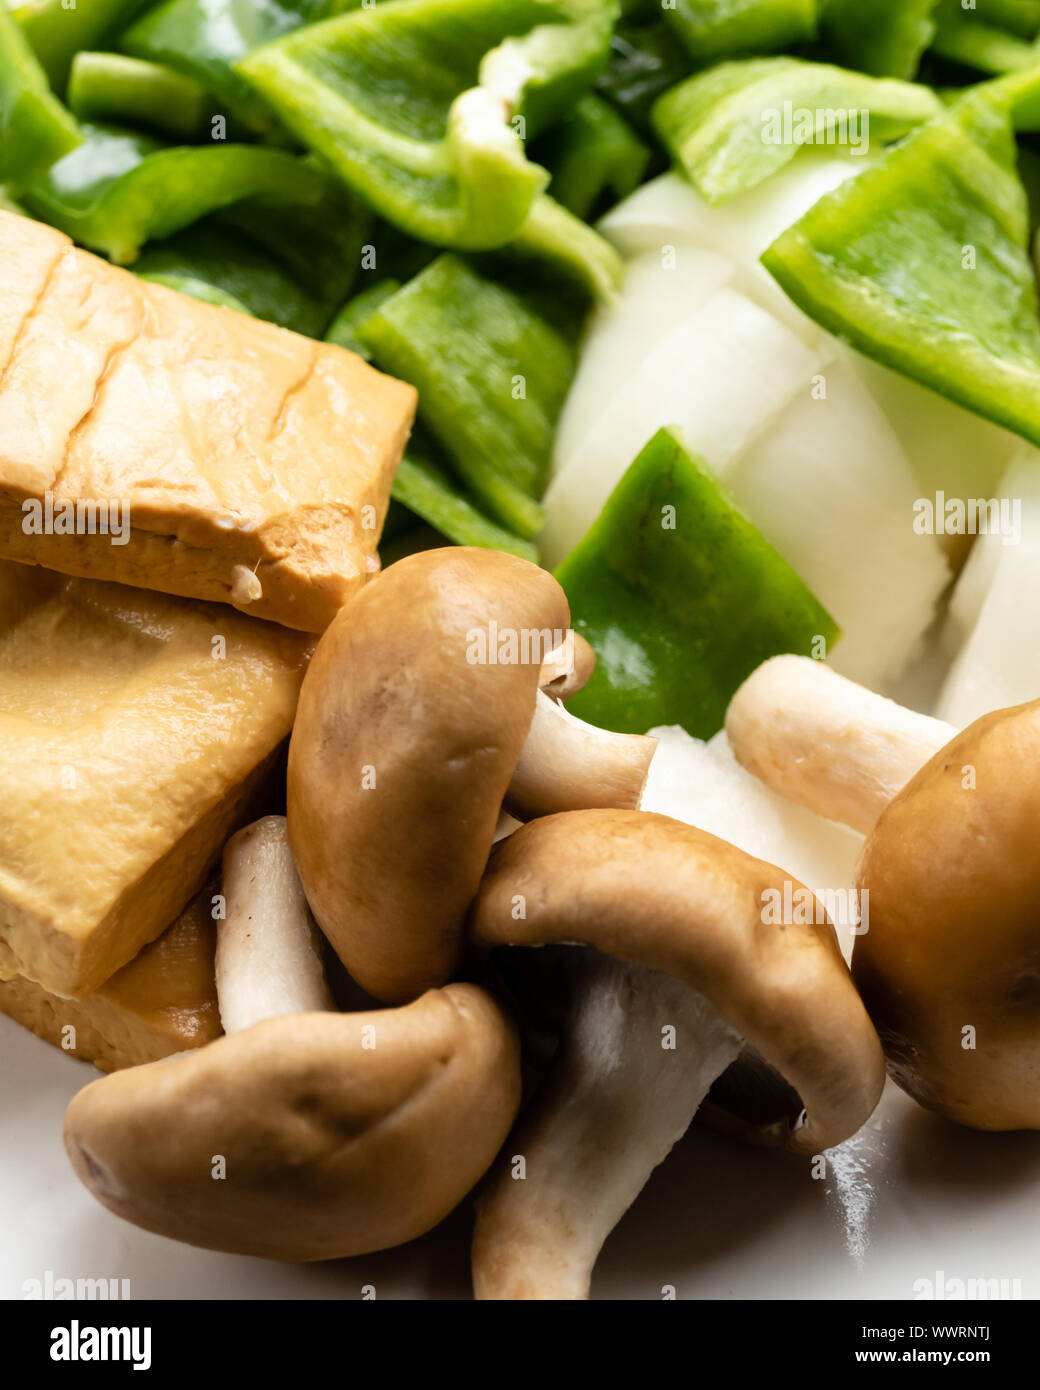 Green peppers, tofu, onion, and mushrooms in plate Stock Photo